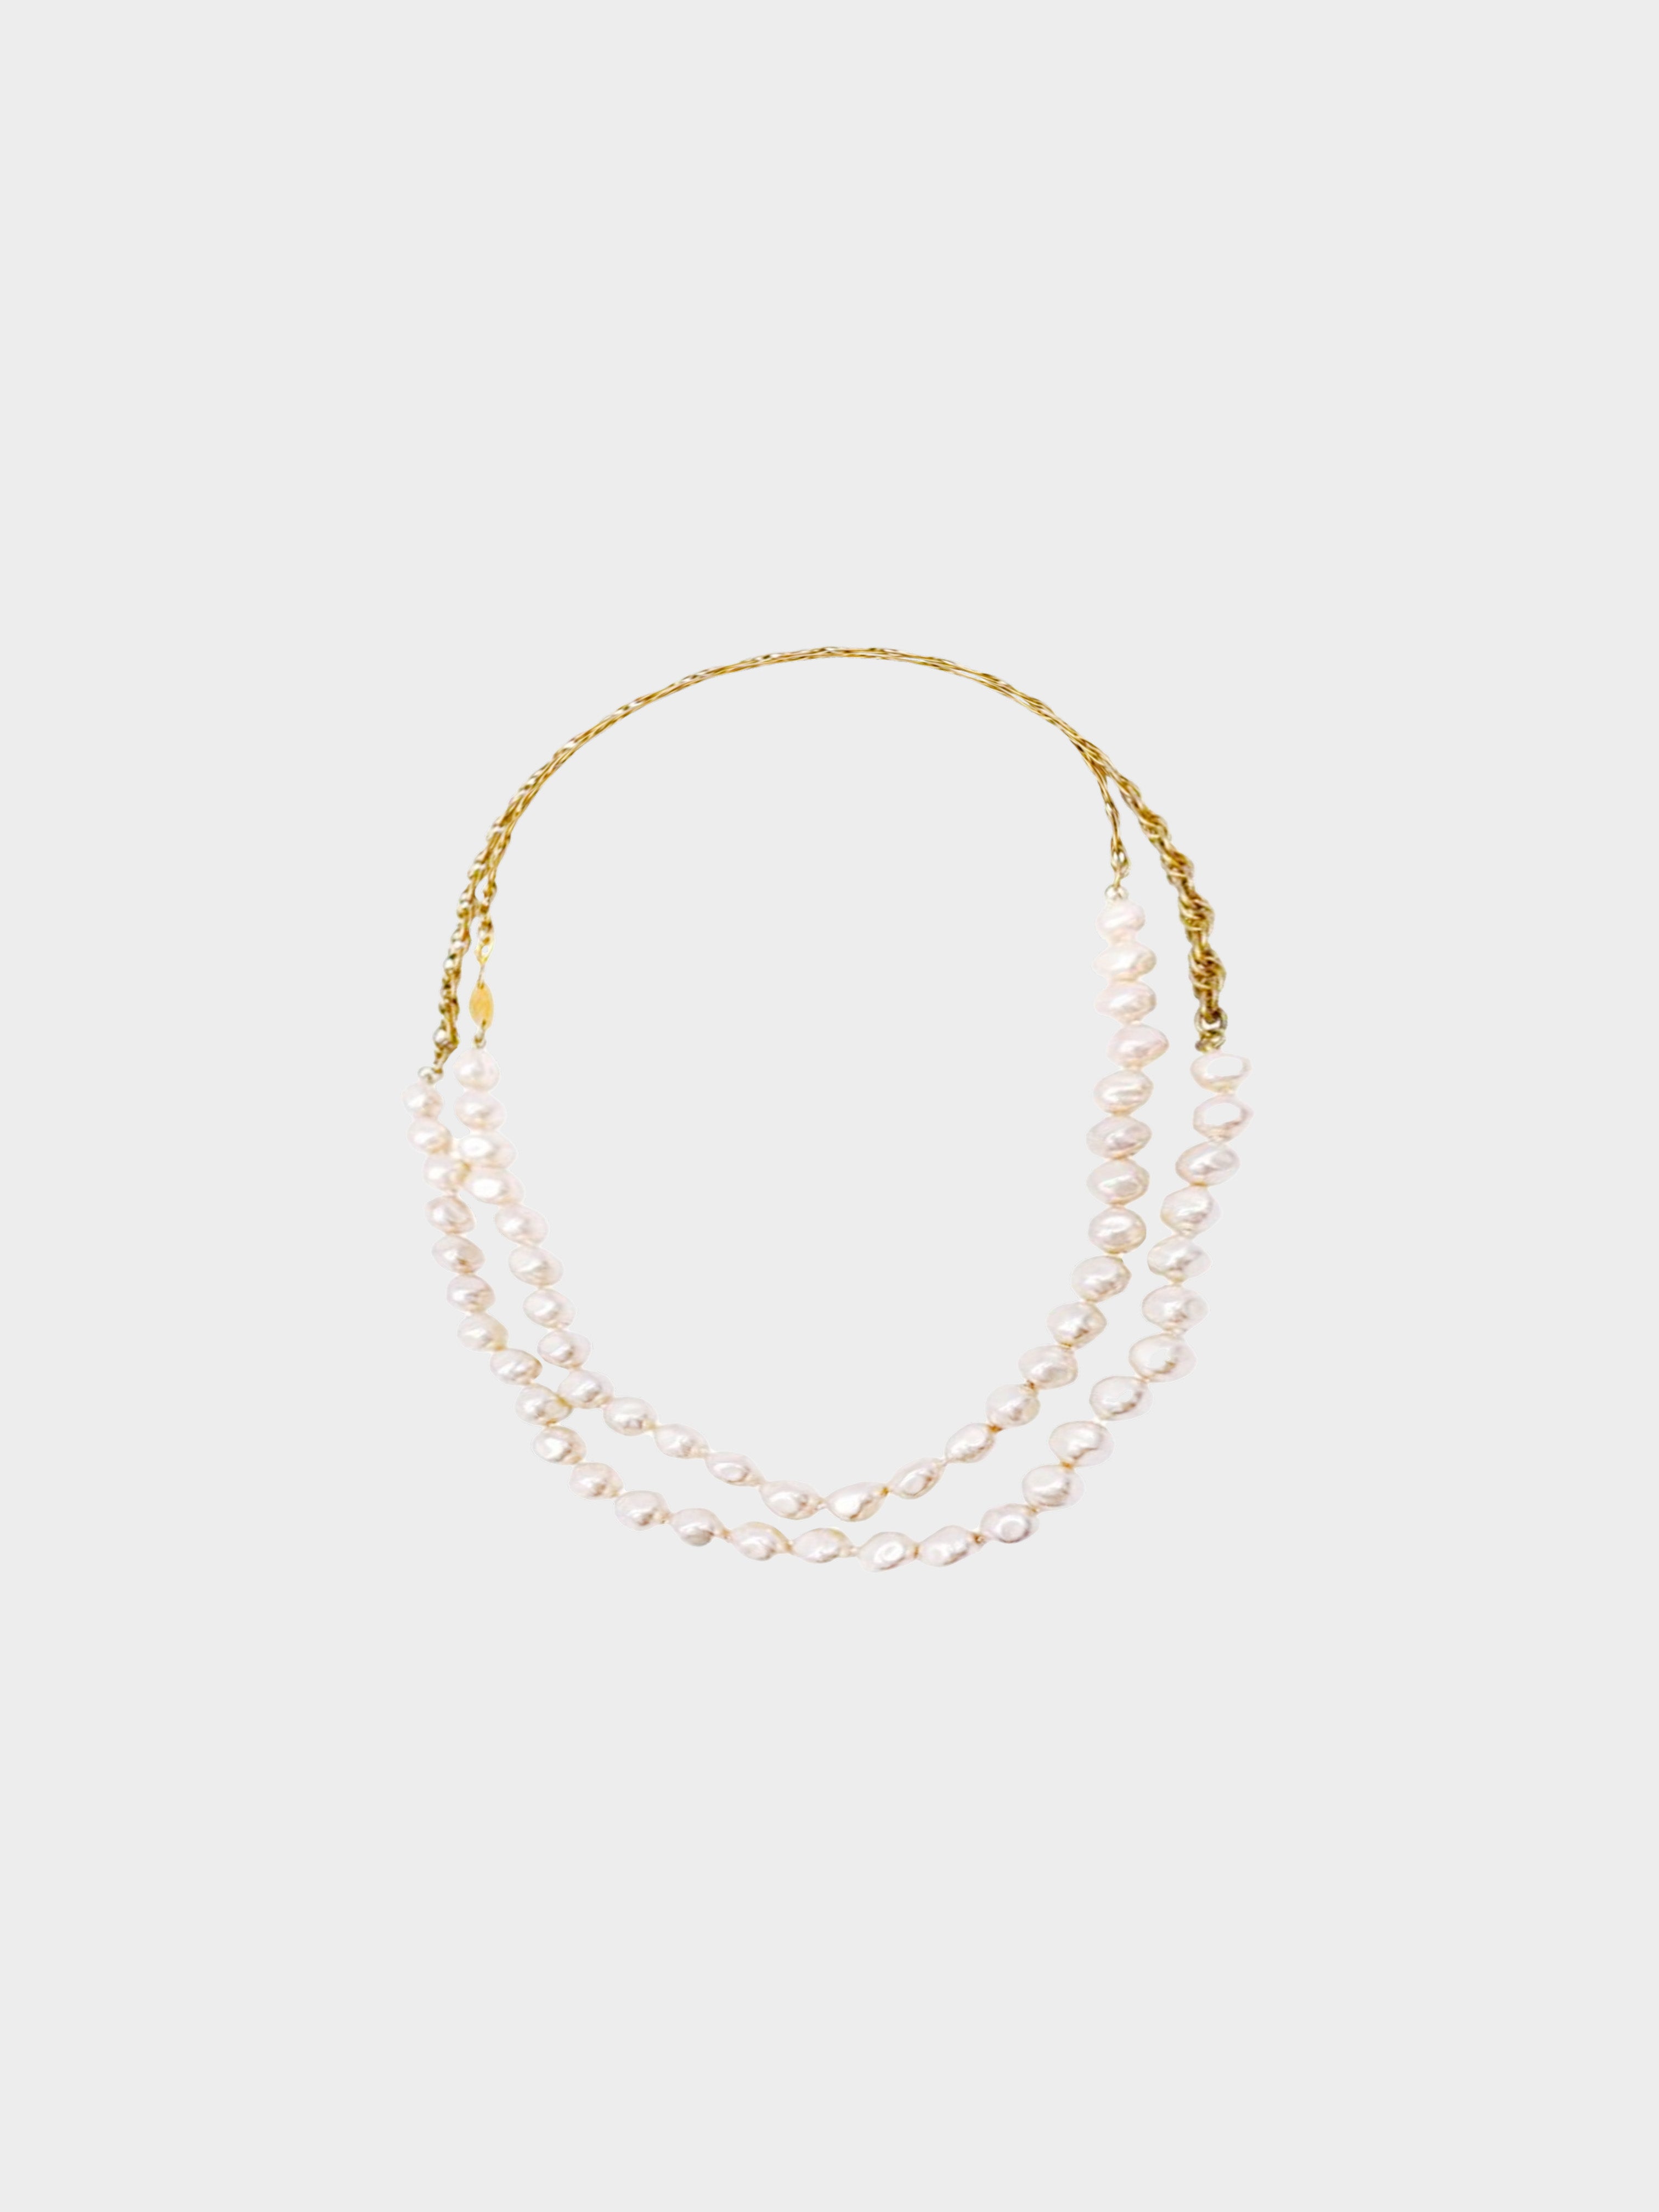 CHANEL Graduated Pearl Crystal CC Long Necklace Light Gold 204446